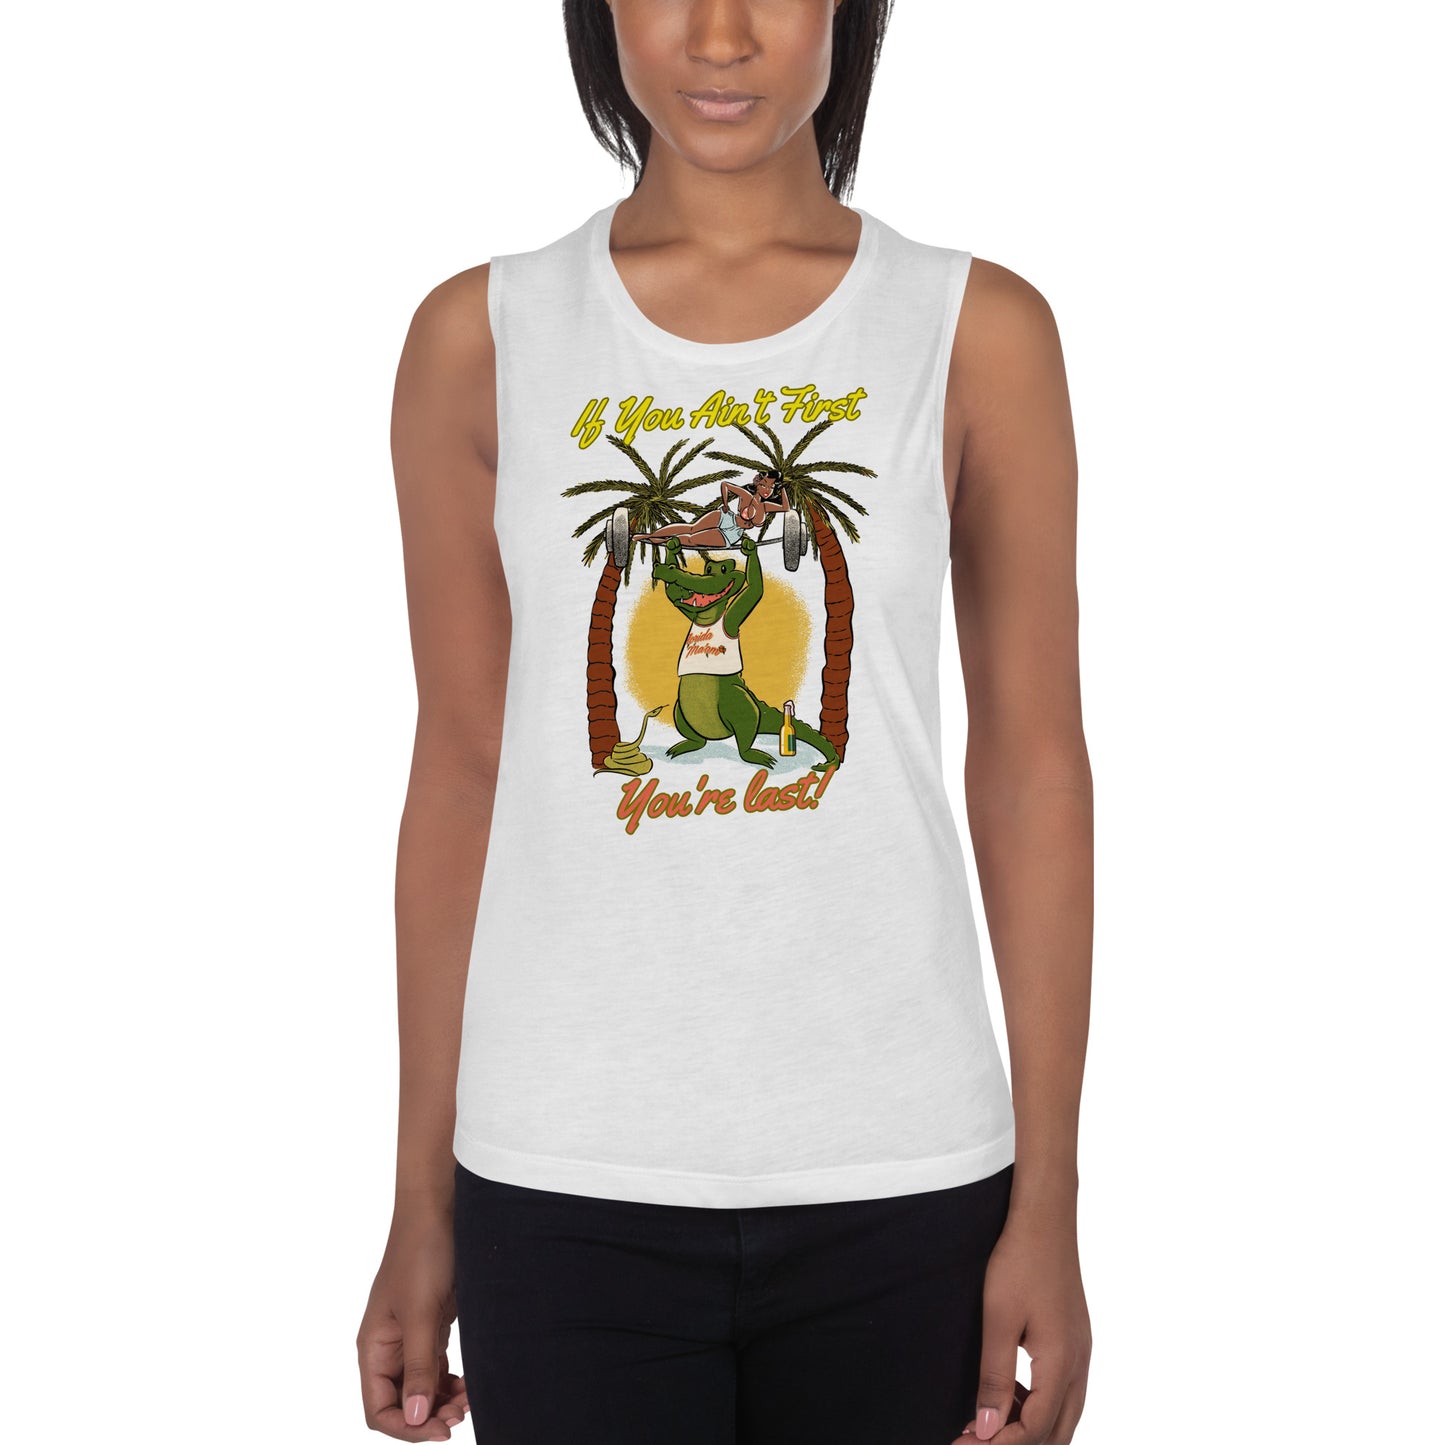 Dreama First Place Ladies’ Muscle Tank